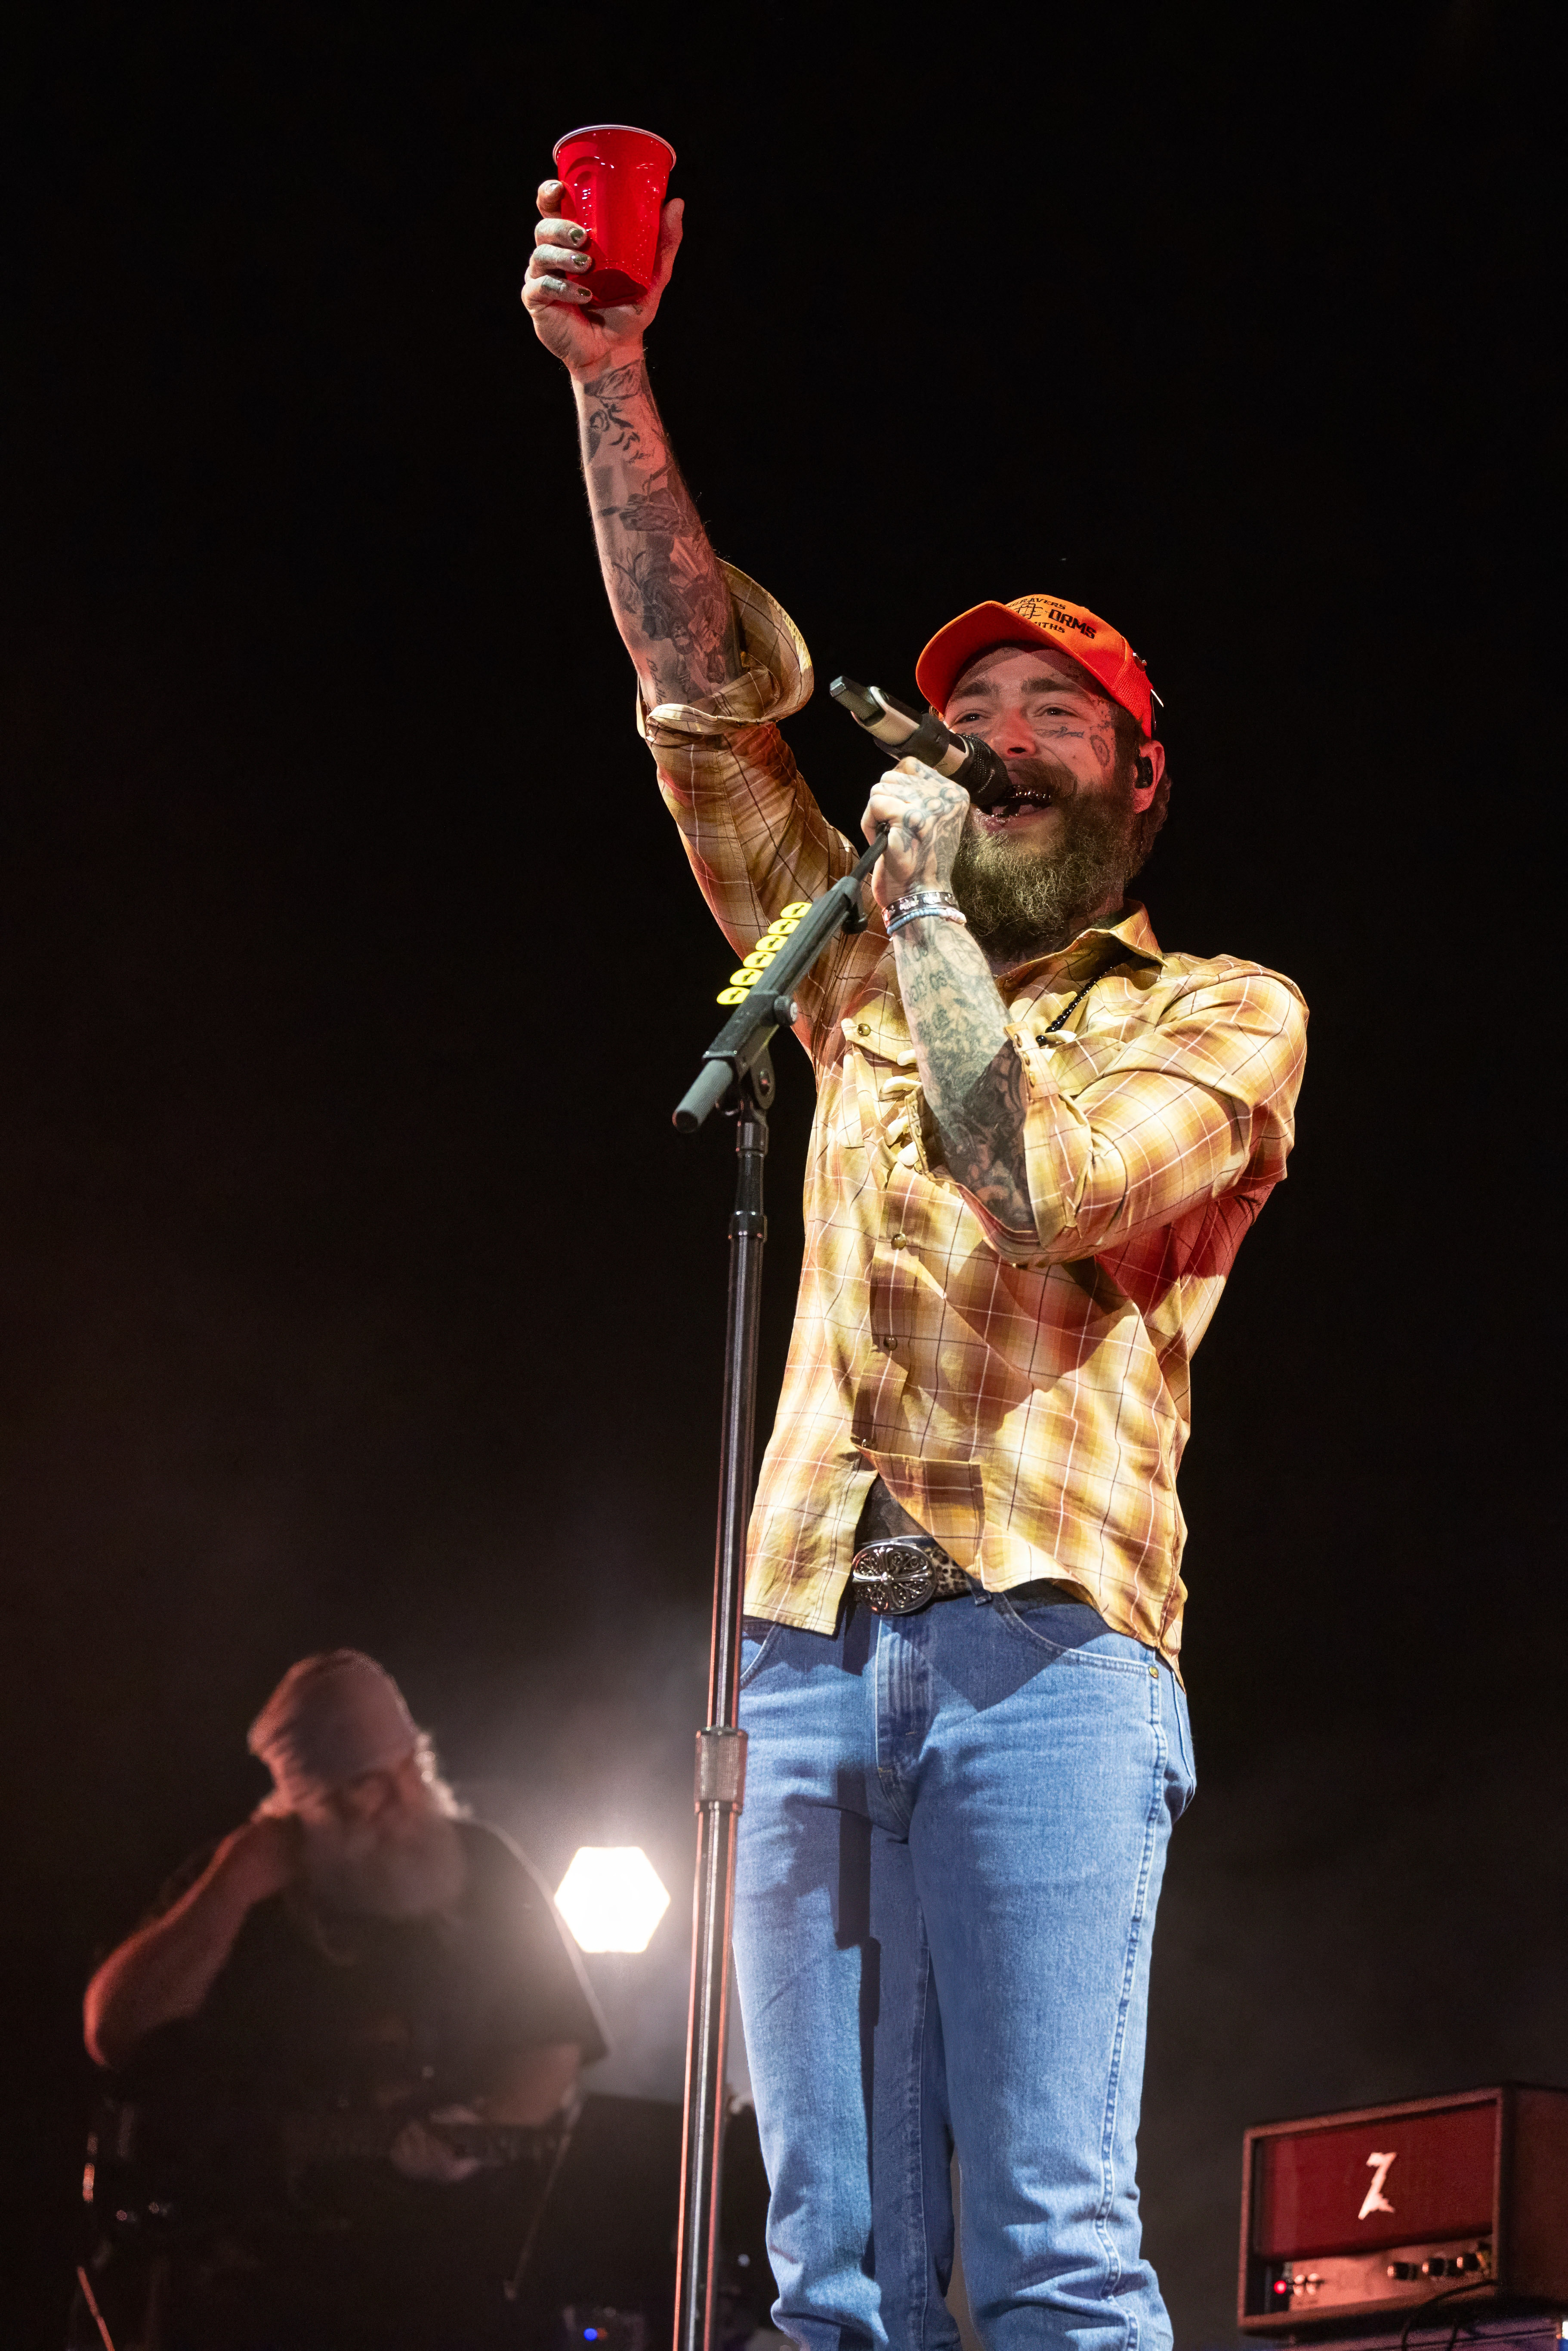 Post Malone's casual performance outfits flaunted his drastic weight loss